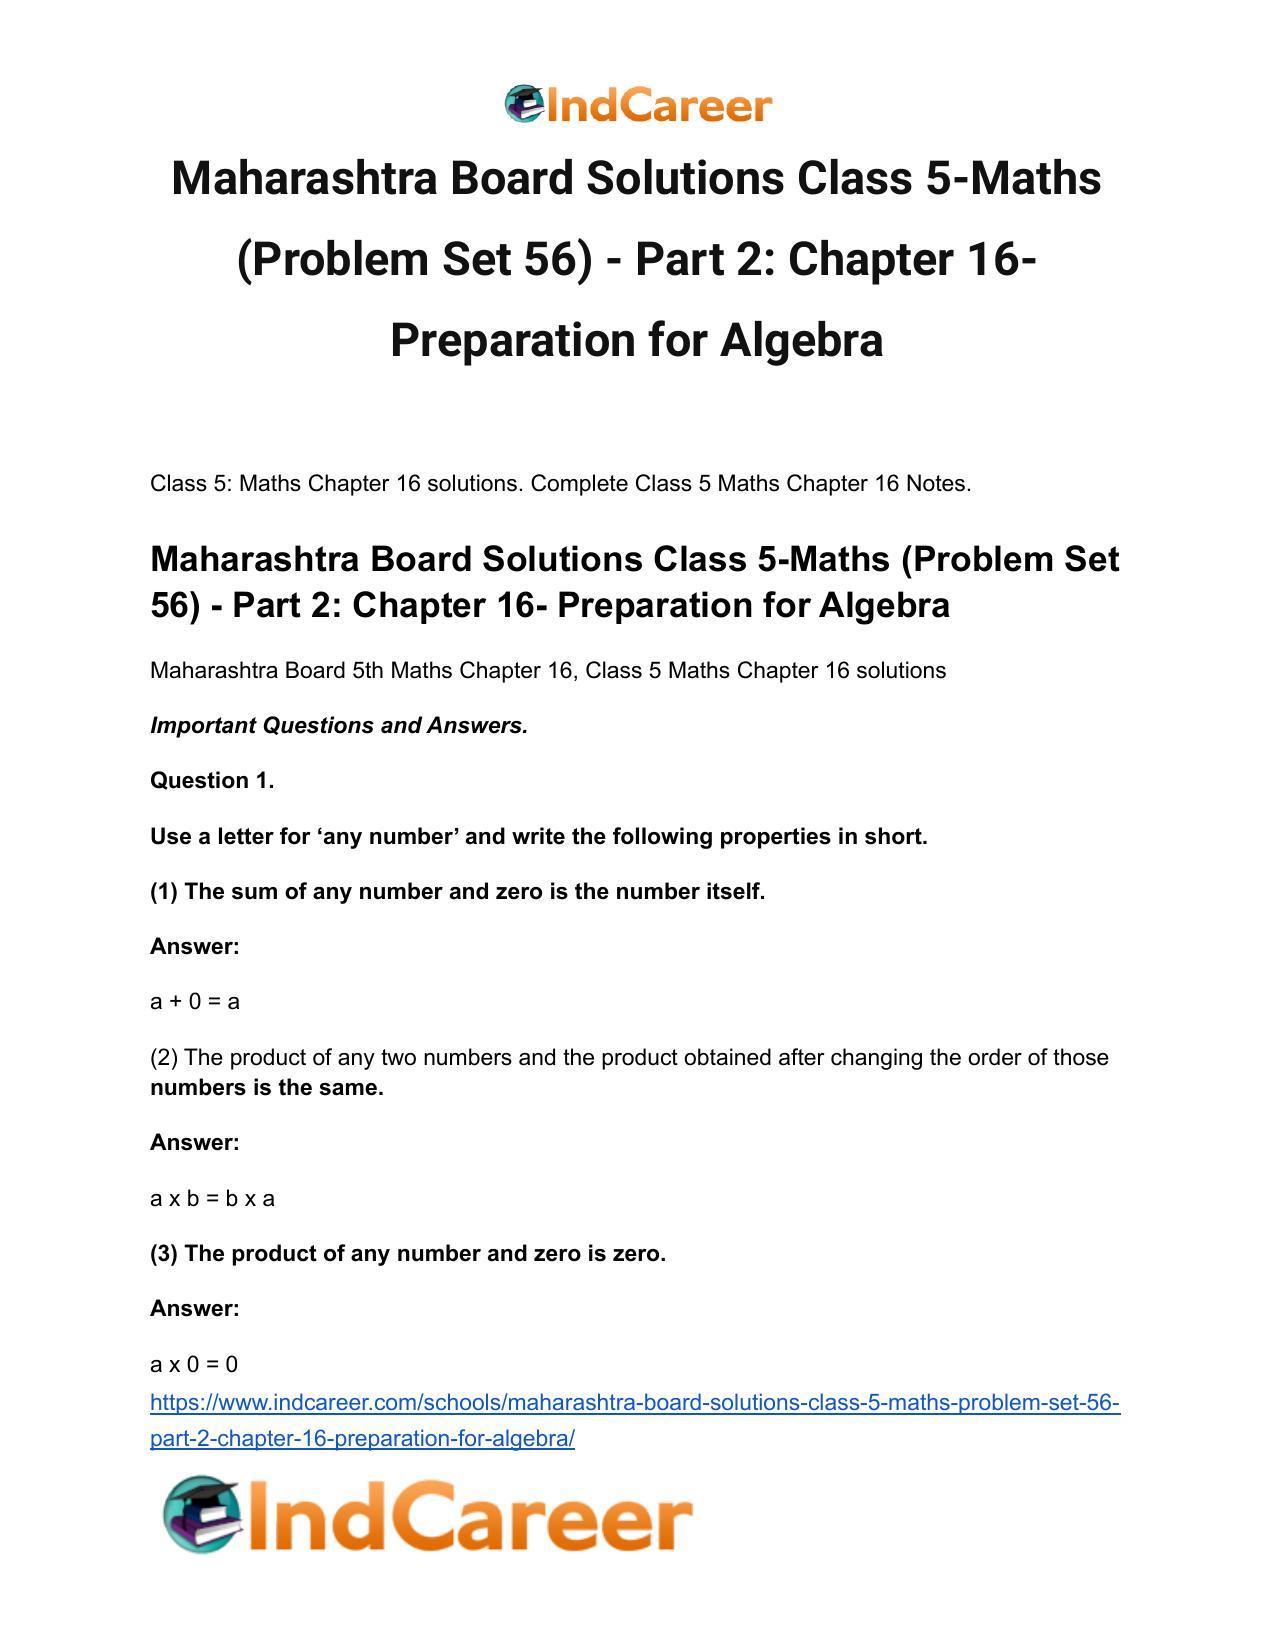 Maharashtra Board Solutions Class 5-Maths (Problem Set 56) - Part 2: Chapter 16- Preparation for Algebra - Page 2